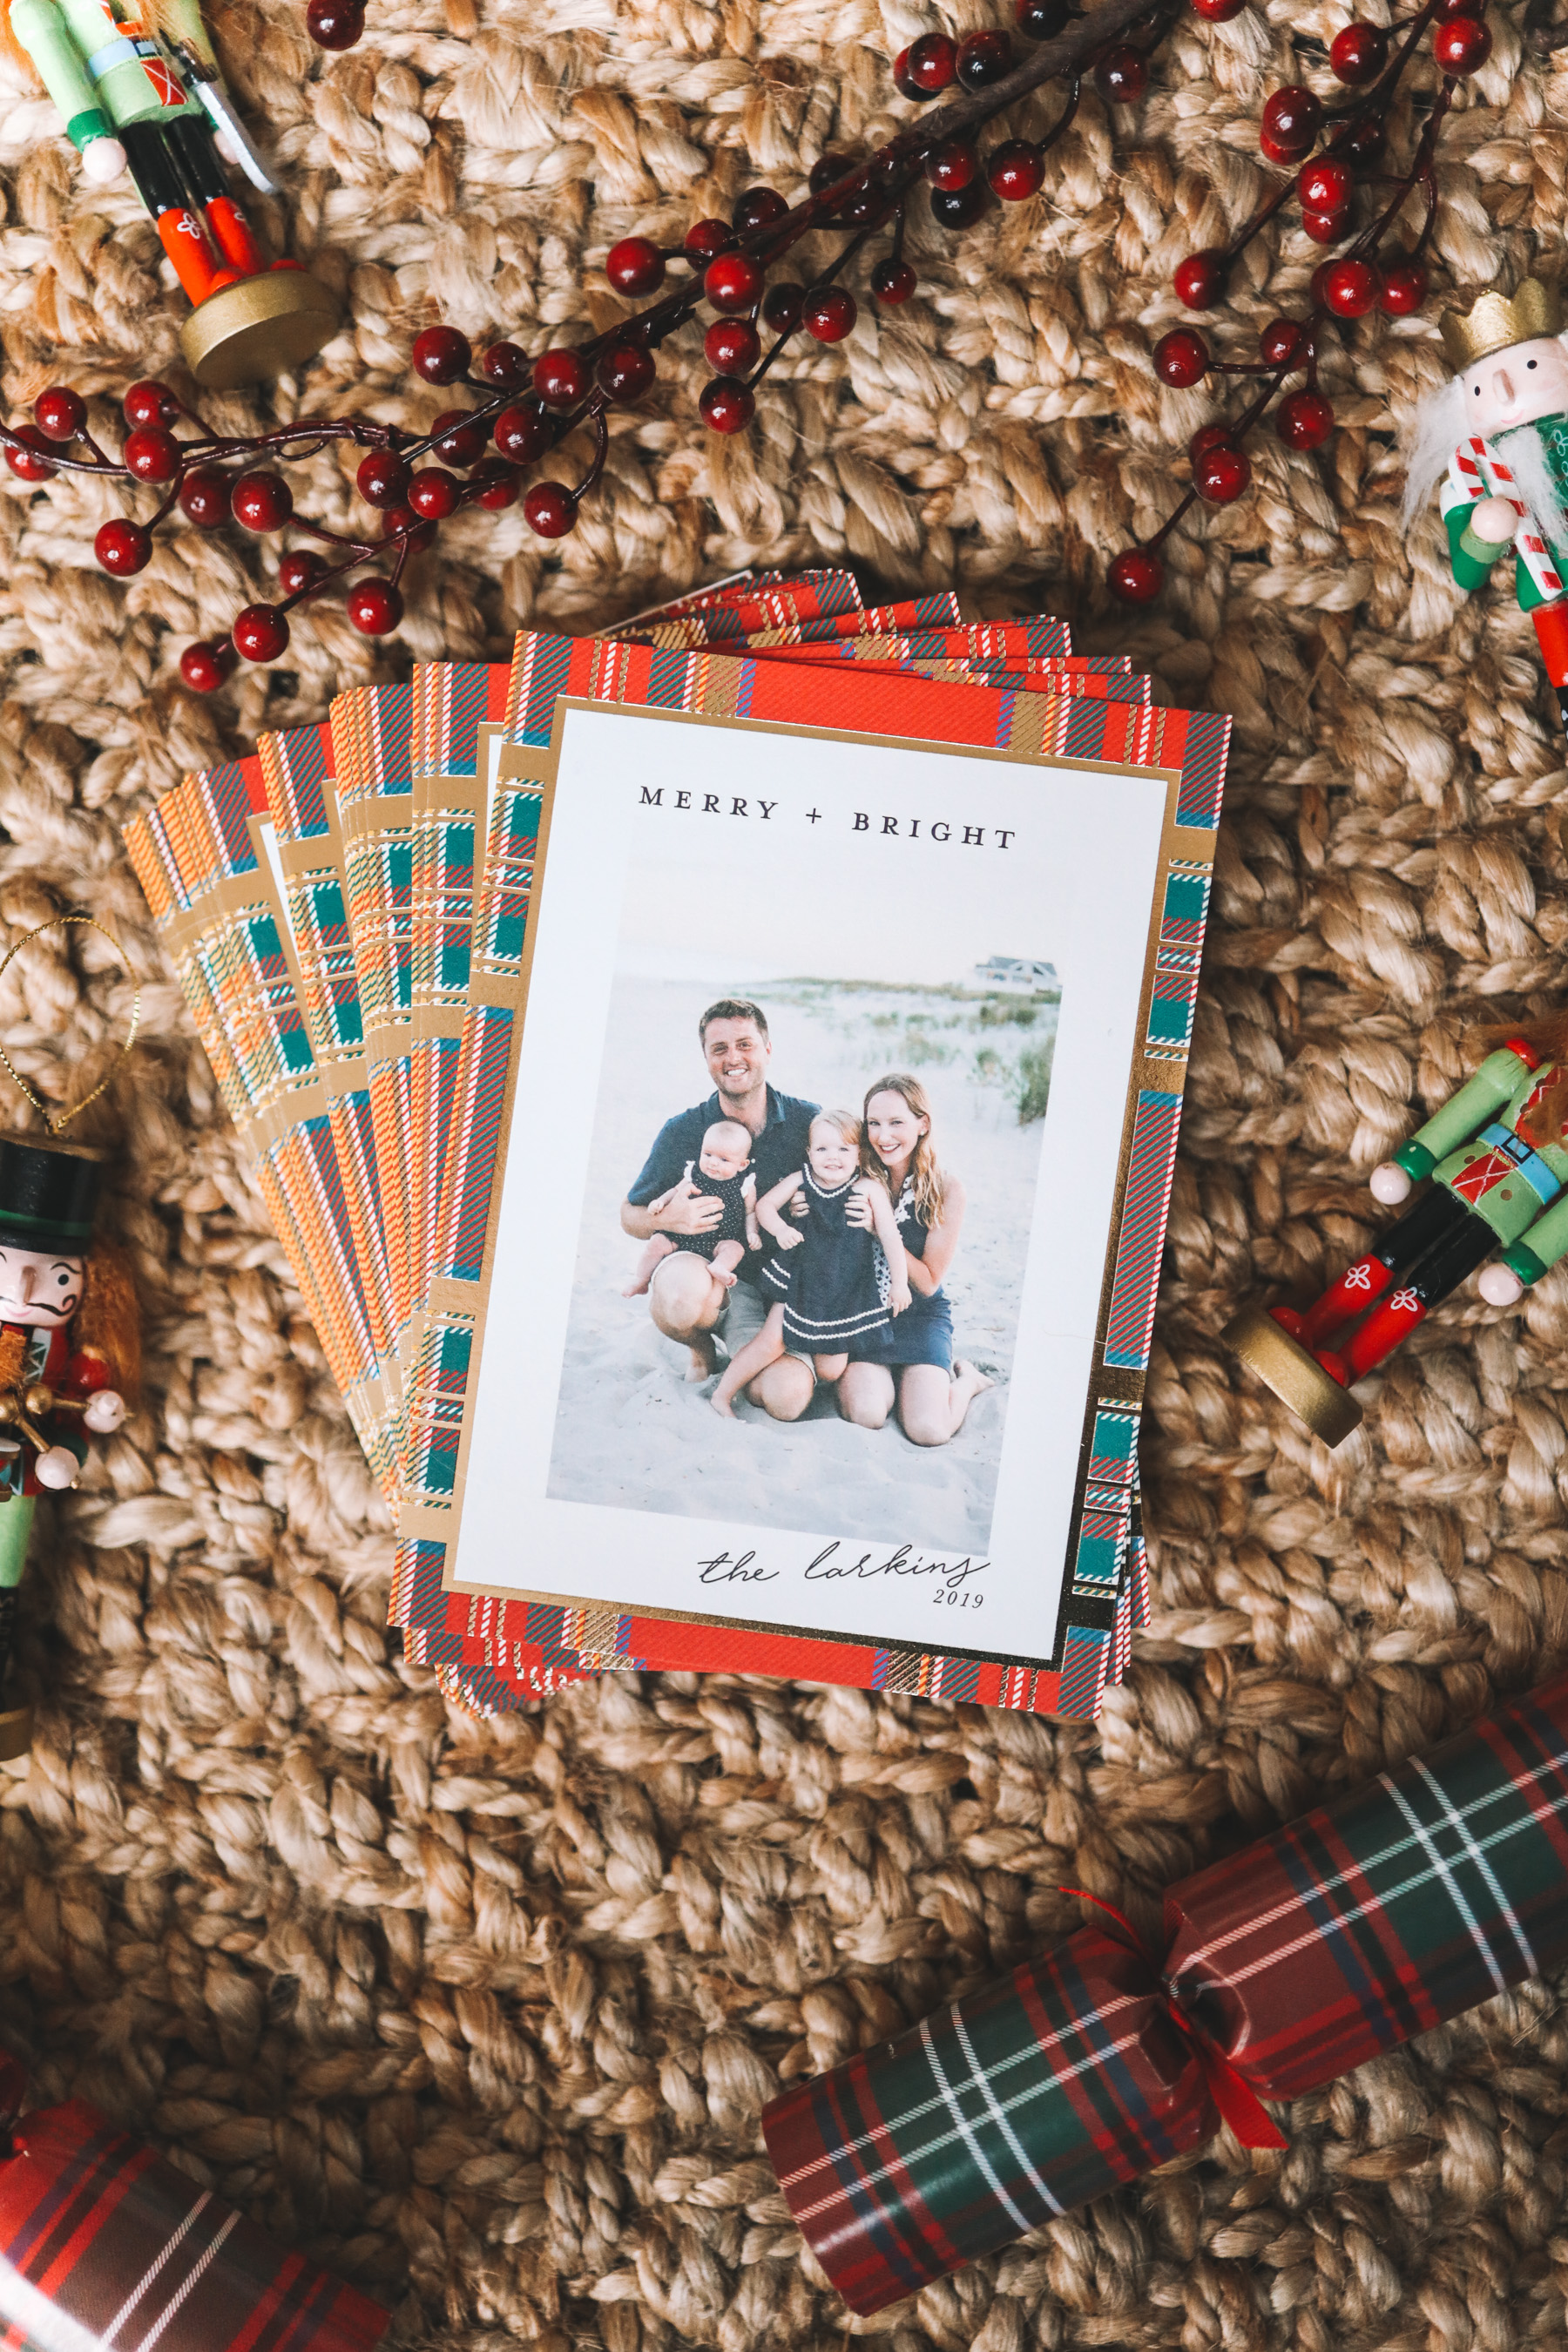 Our 2019 Holiday Cards